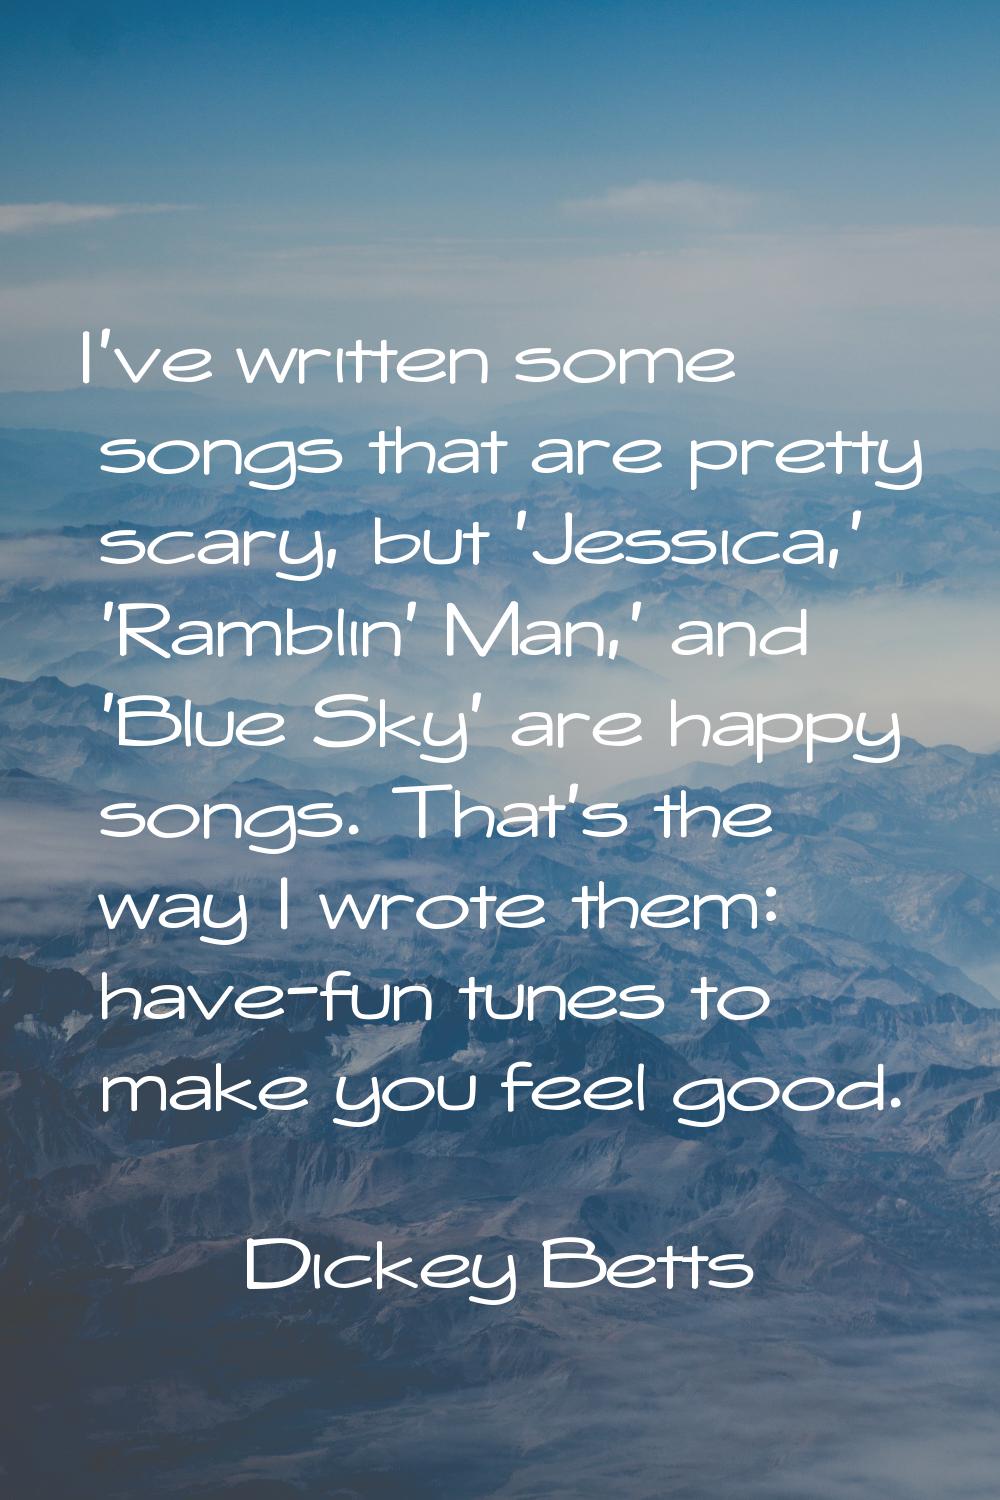 I've written some songs that are pretty scary, but 'Jessica,' 'Ramblin' Man,' and 'Blue Sky' are ha